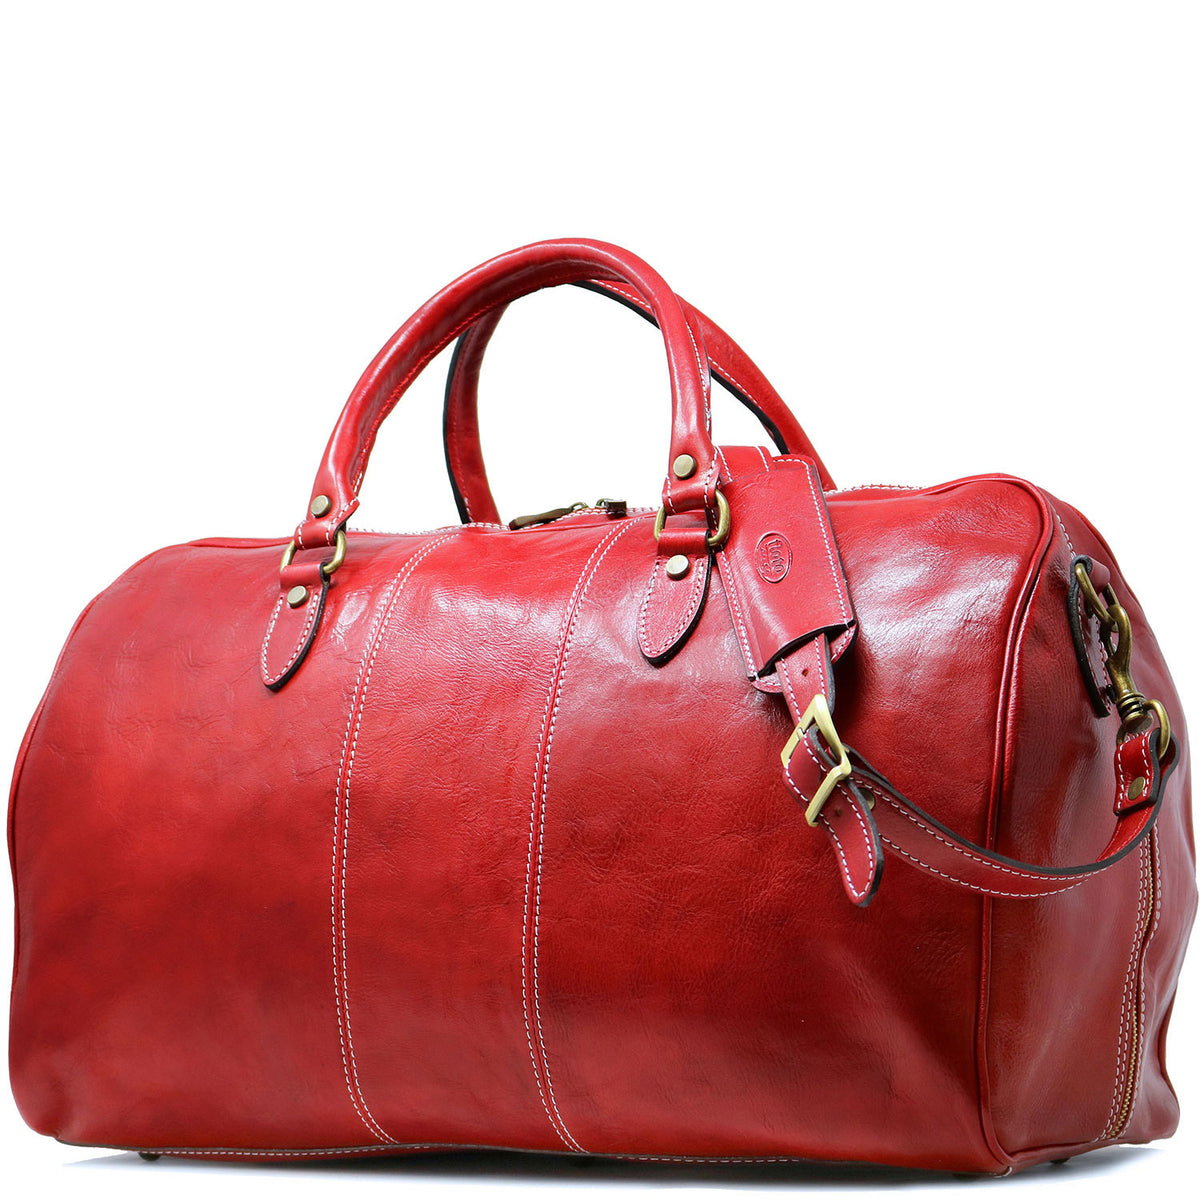 leather travel duffle bag